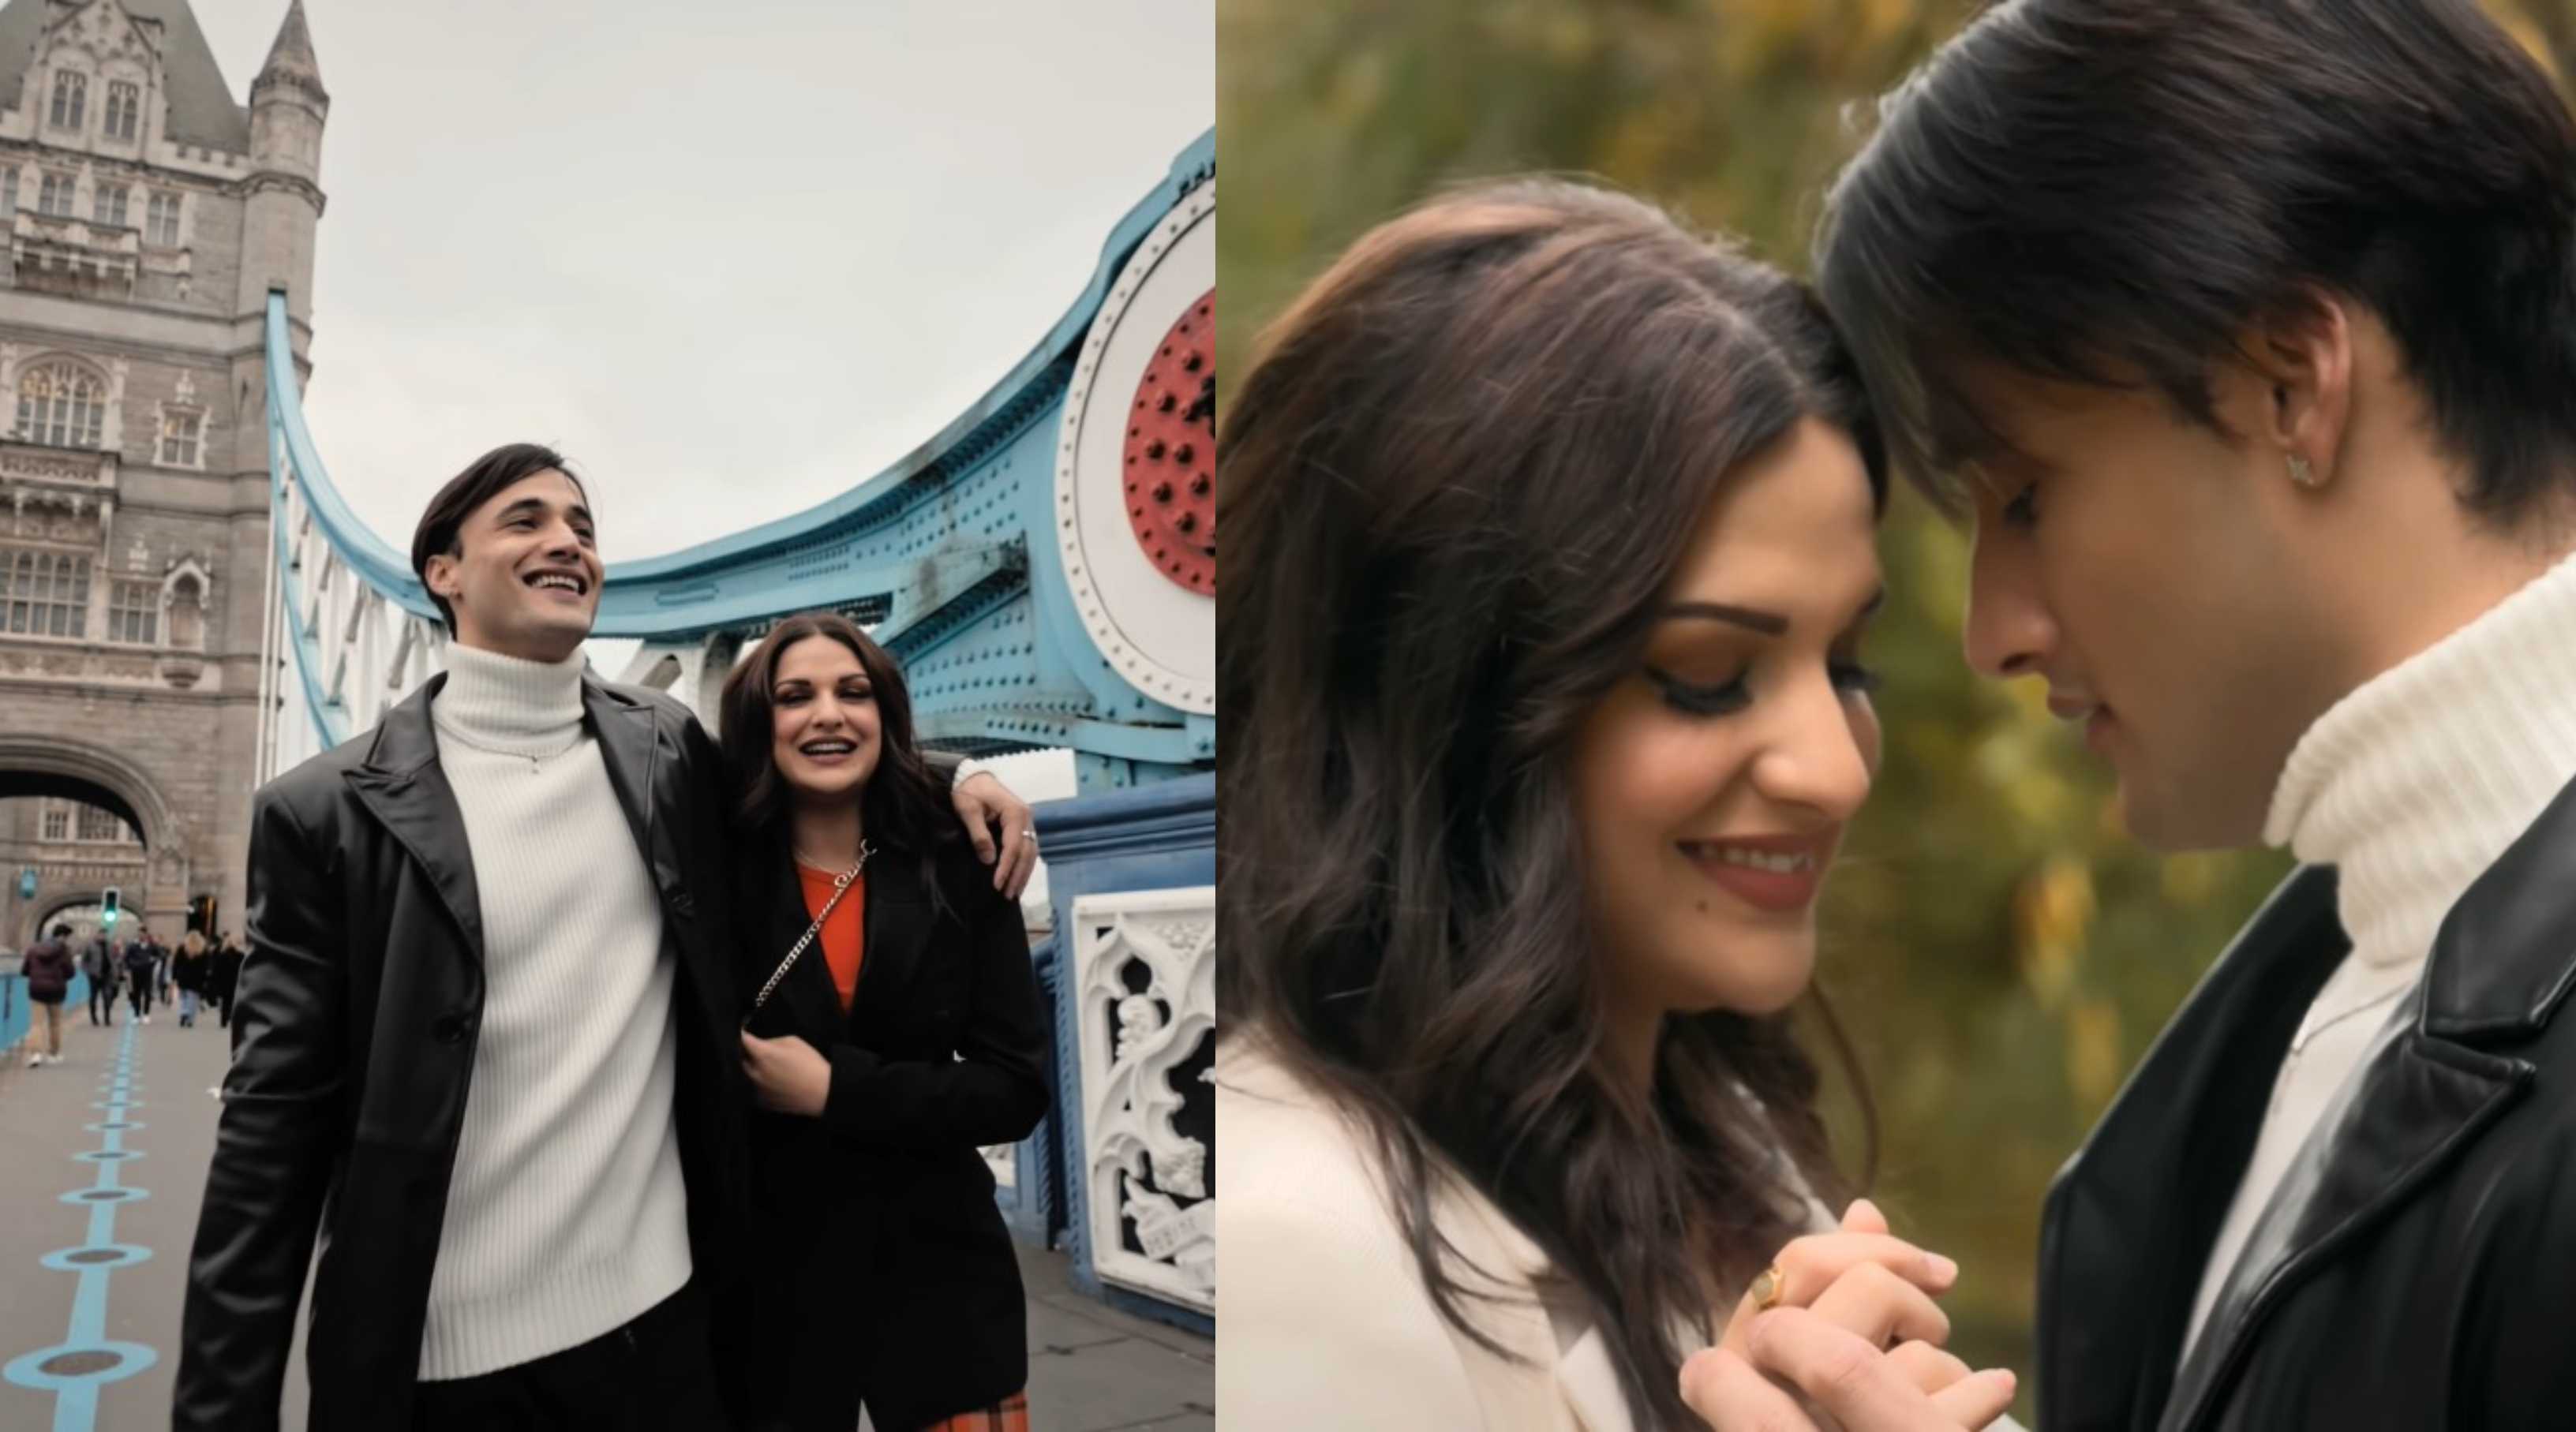 Pinjra song teaser: Asim Riaz and Himanshi Khurana explore London together in new love song